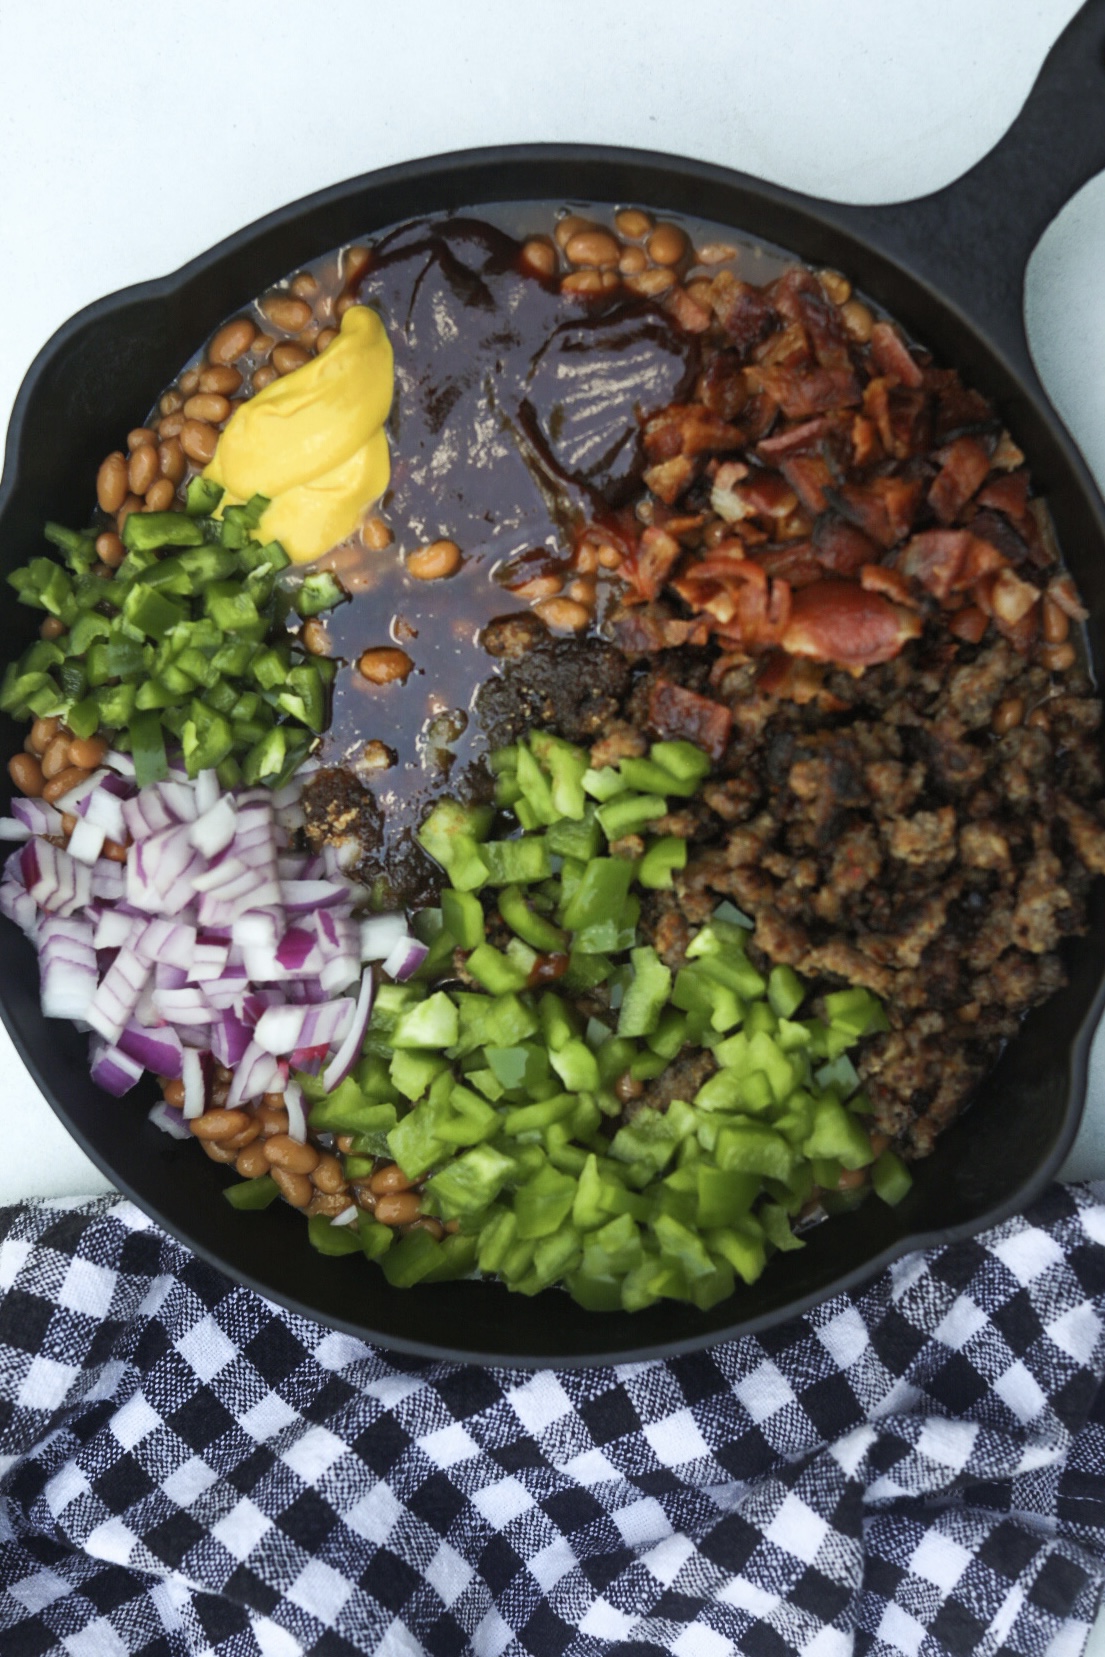 Baked bean casserole in a cast iron skillet with ingredients layered on top of the baked beans. Chopped jalapeno, red onion, green bell pepper, mustard, BBQ sauce, ground sausage and crumbled bacon.